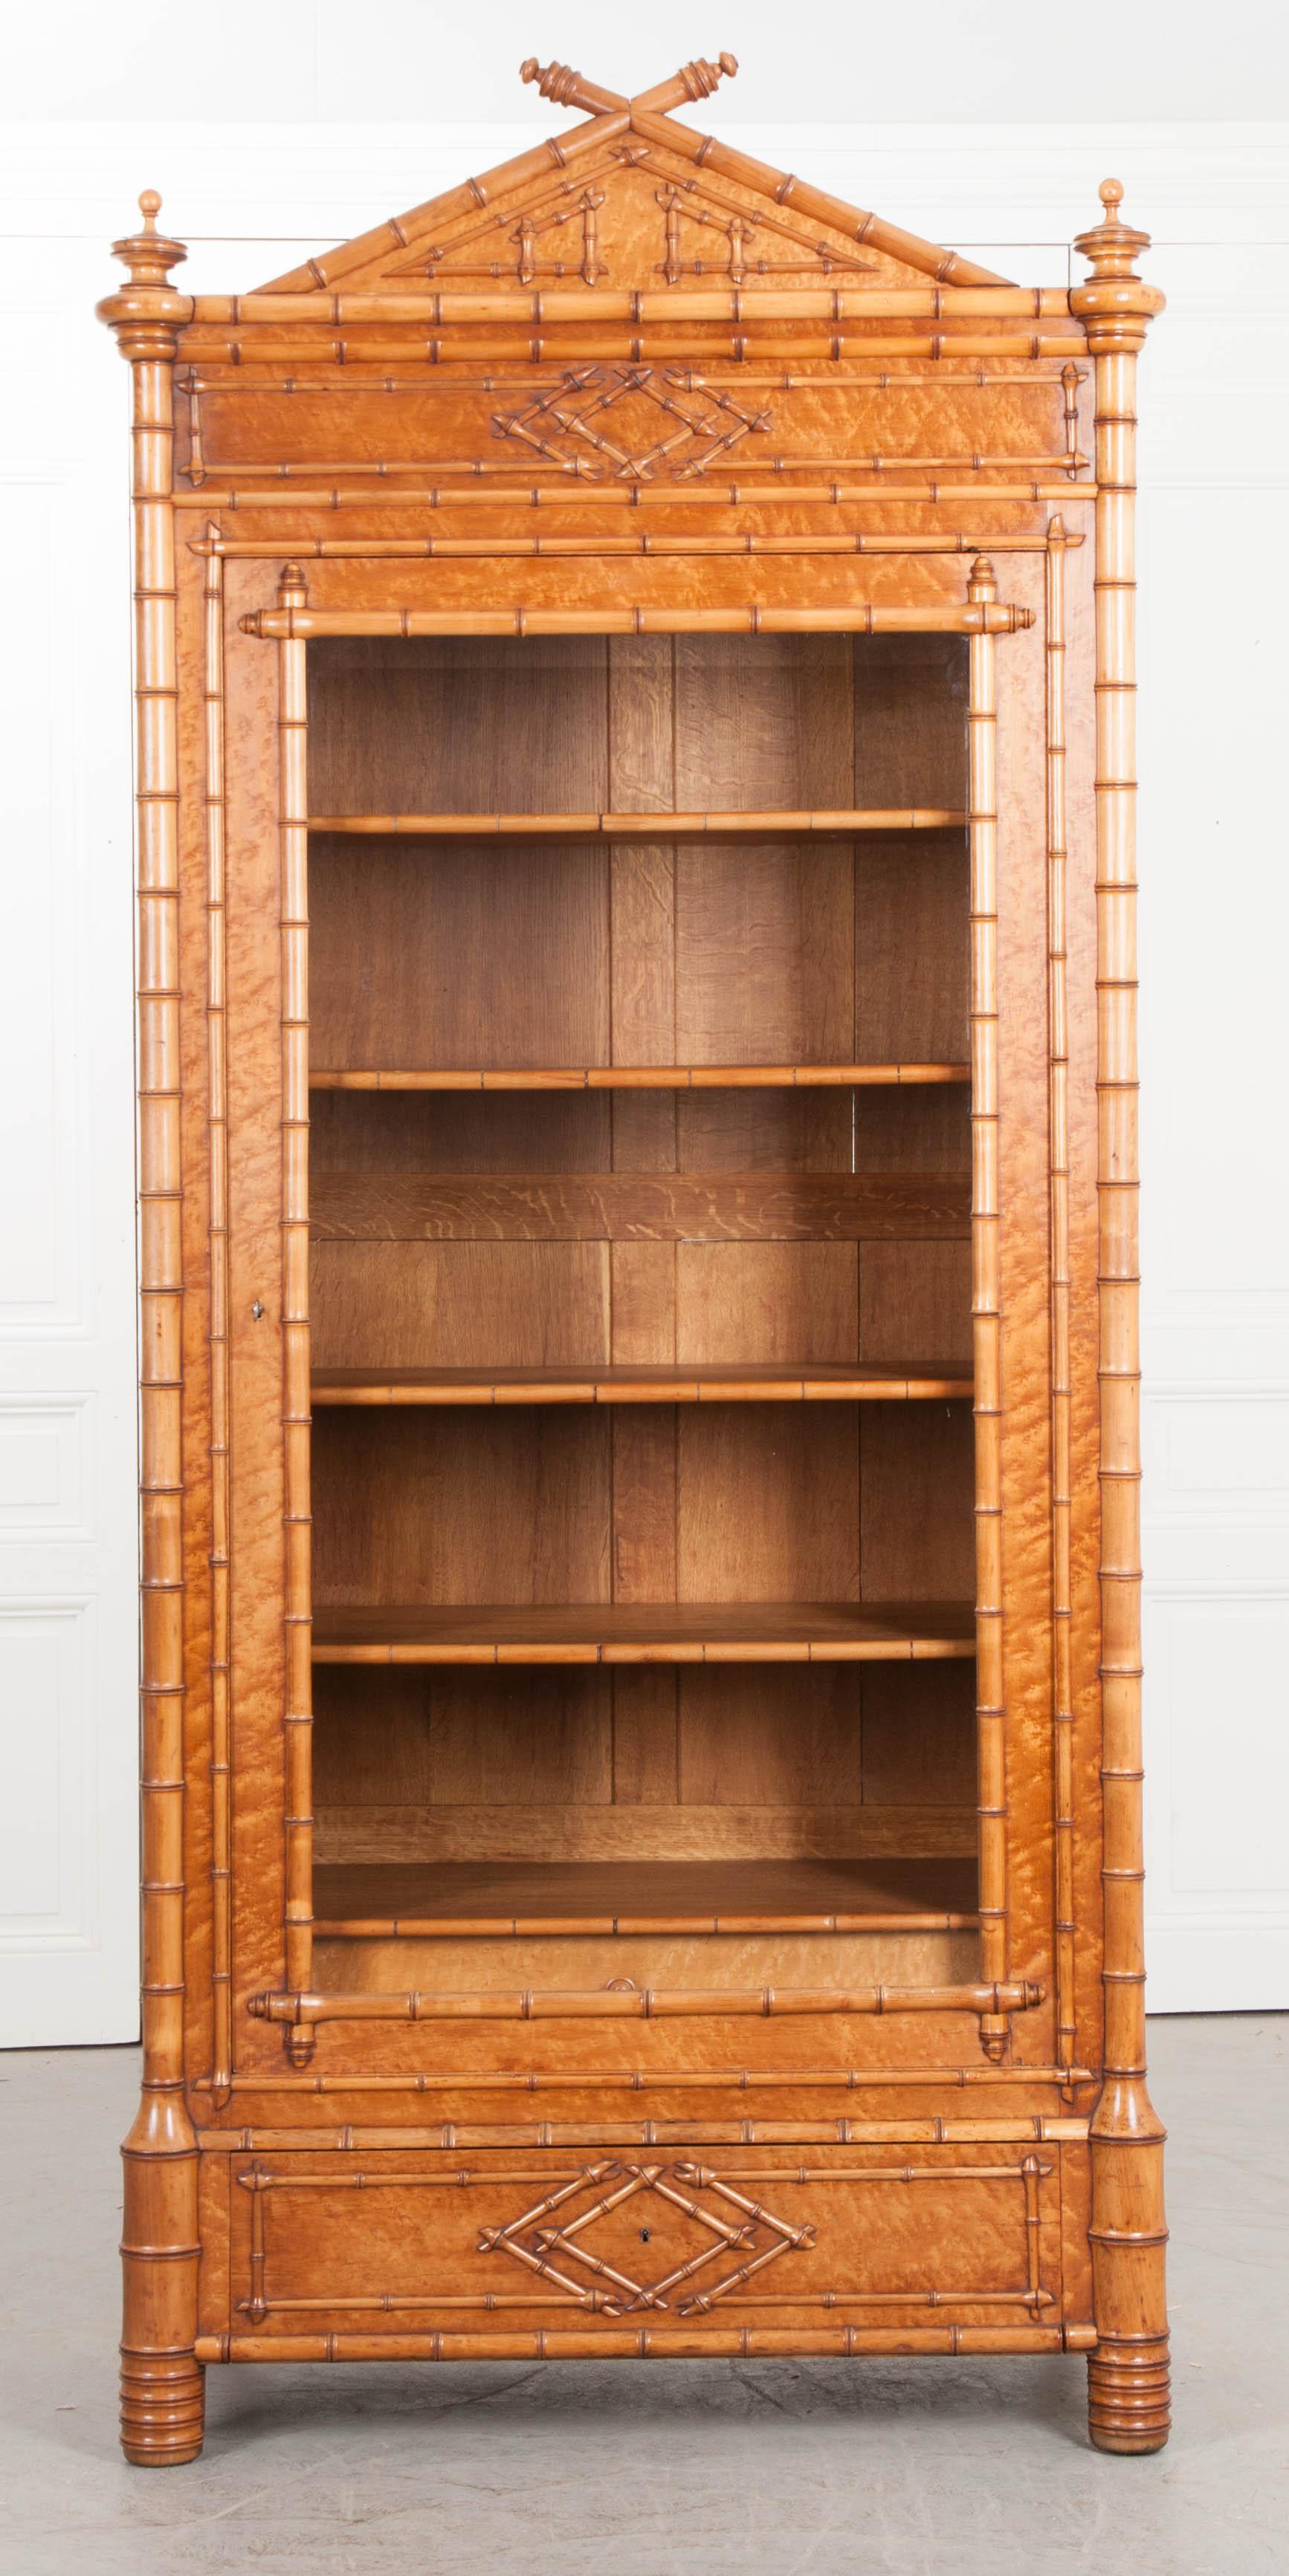 An incredible carved faux bamboo bibliothèque from 1890s France. This single-door bookcase features intricately carved wood, made to look like real bamboo. Exquisite bird’s eye maple complements the blonde toned wood and elevates the excellence of